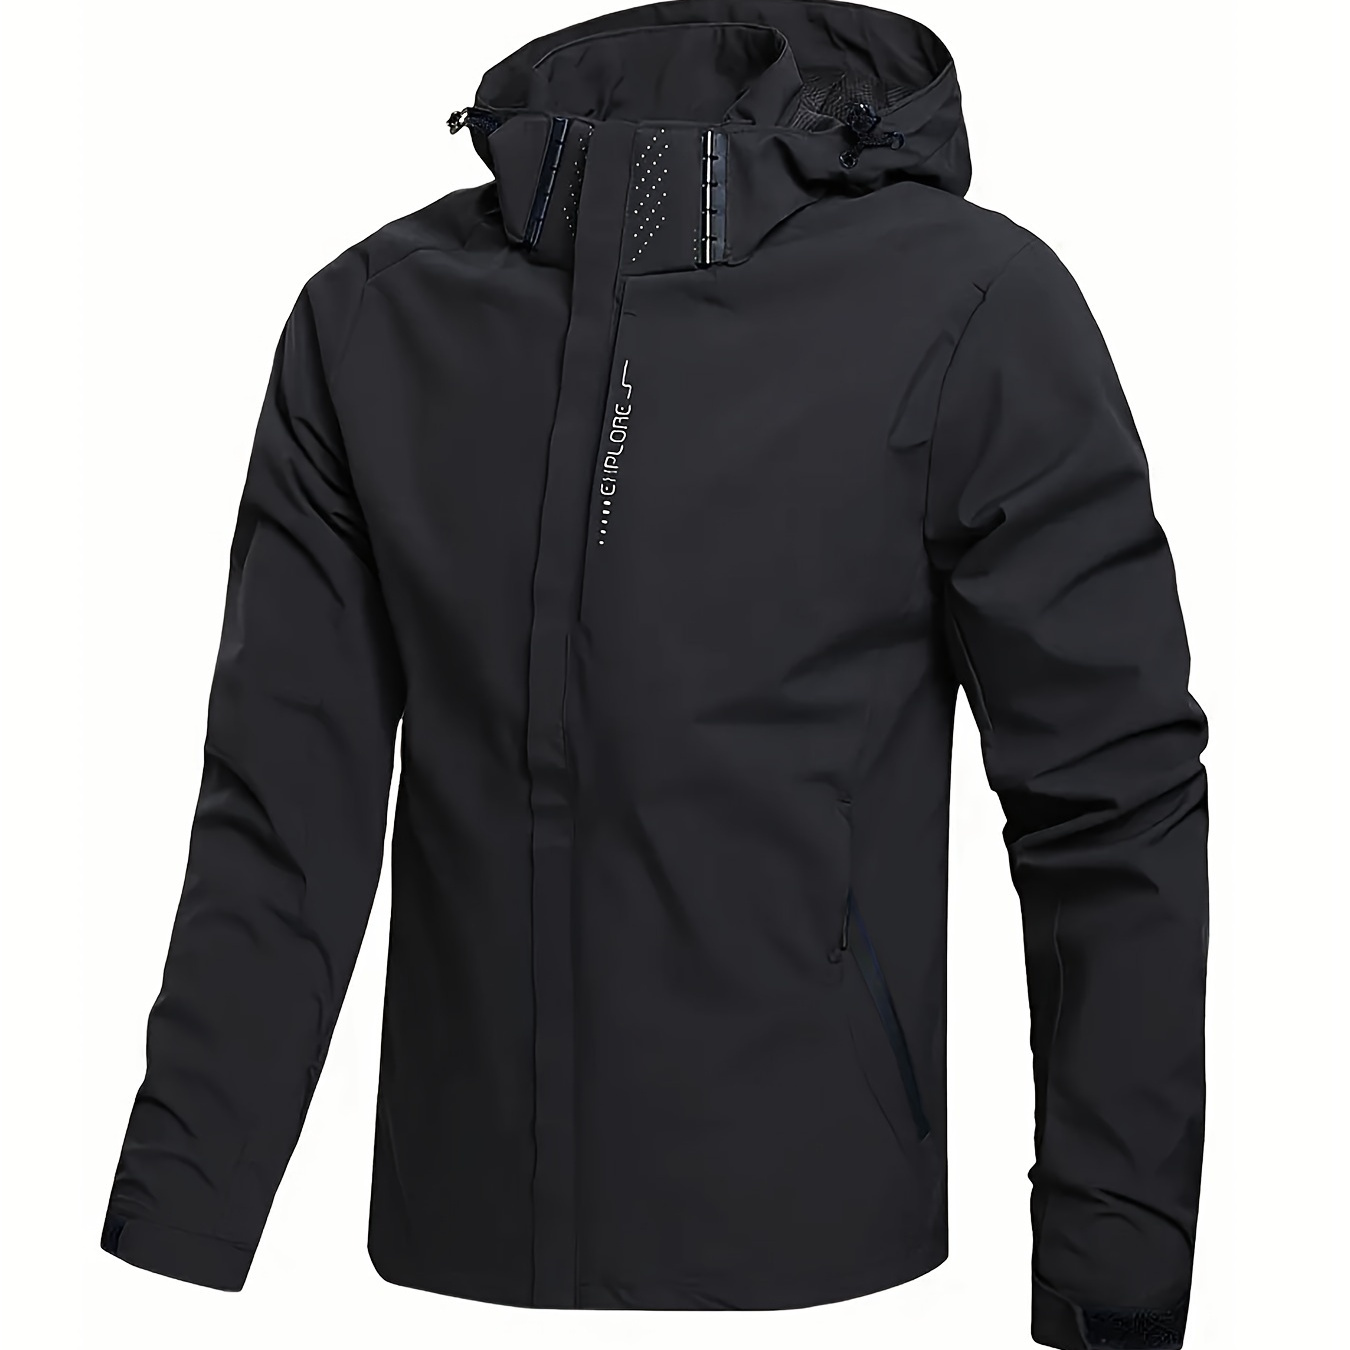 Solid Lightweight Men's Outdoor Windbreaker, Men's Long Sleeve Zip Up Hooded Jacket With Zipper Pockets For Sports, Hiking Cycling Mountaineering